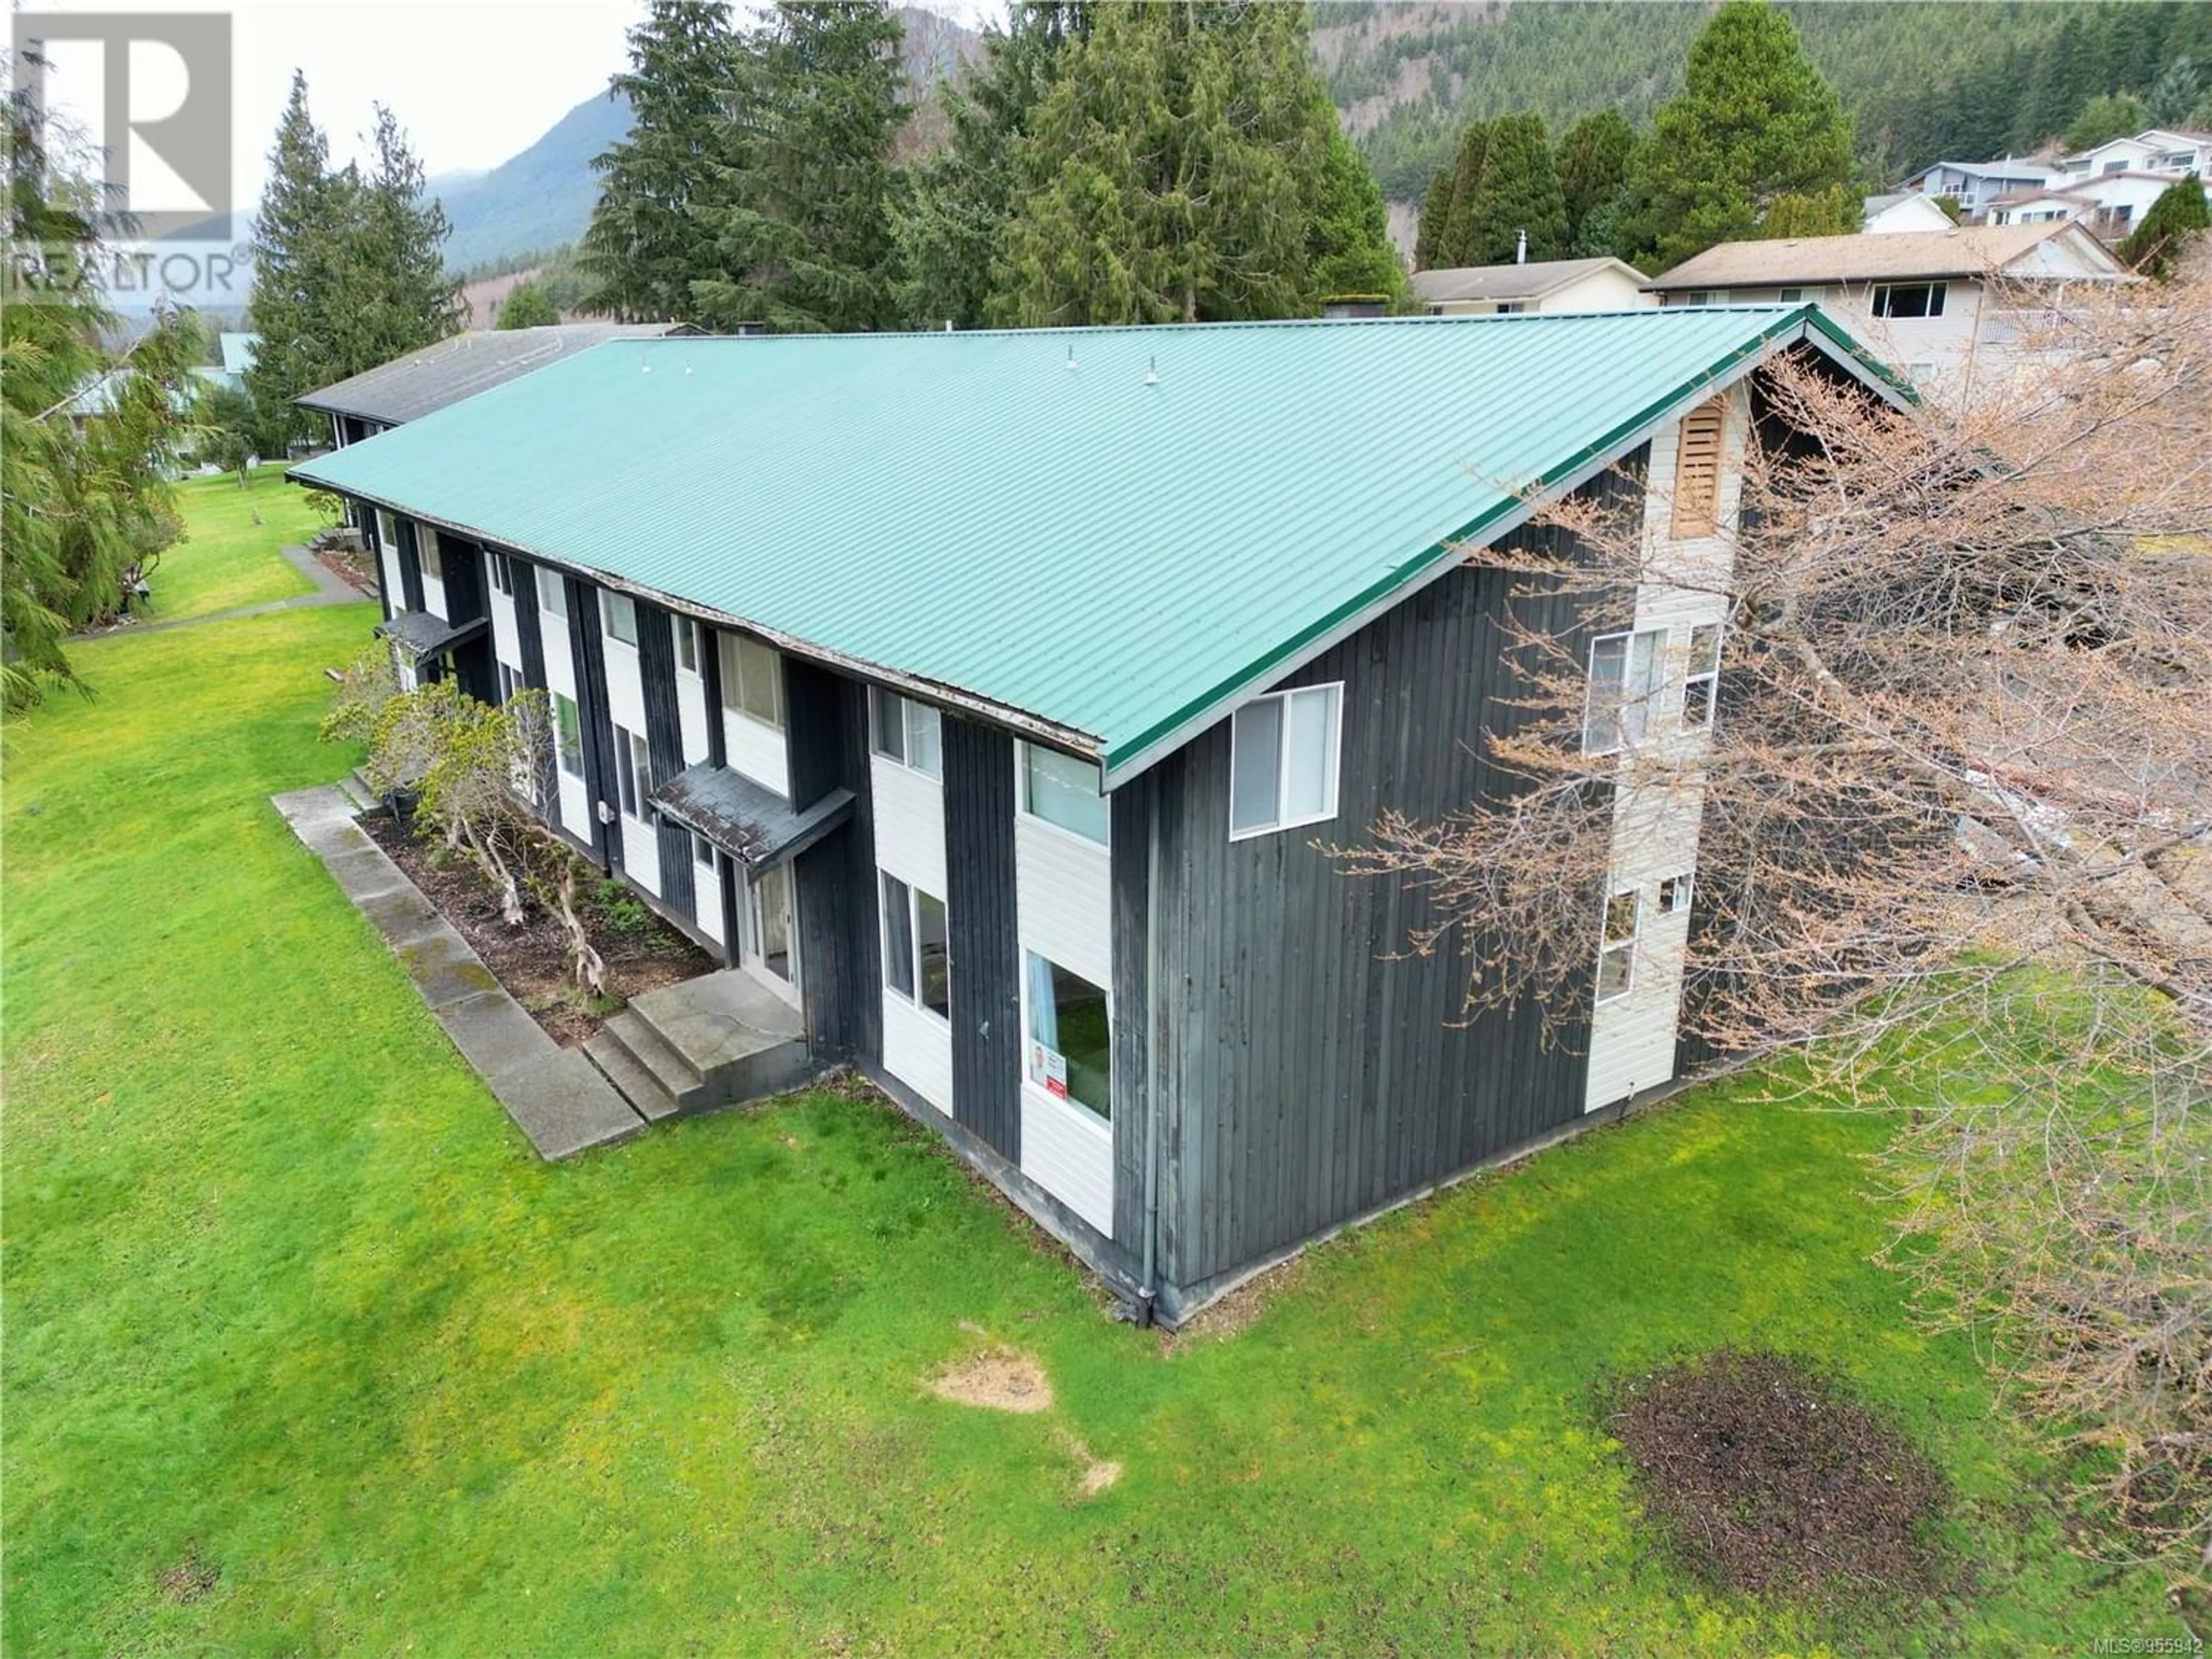 Outside view for 405 1083 Maquinna Ave, Port Alice British Columbia V0N2N0